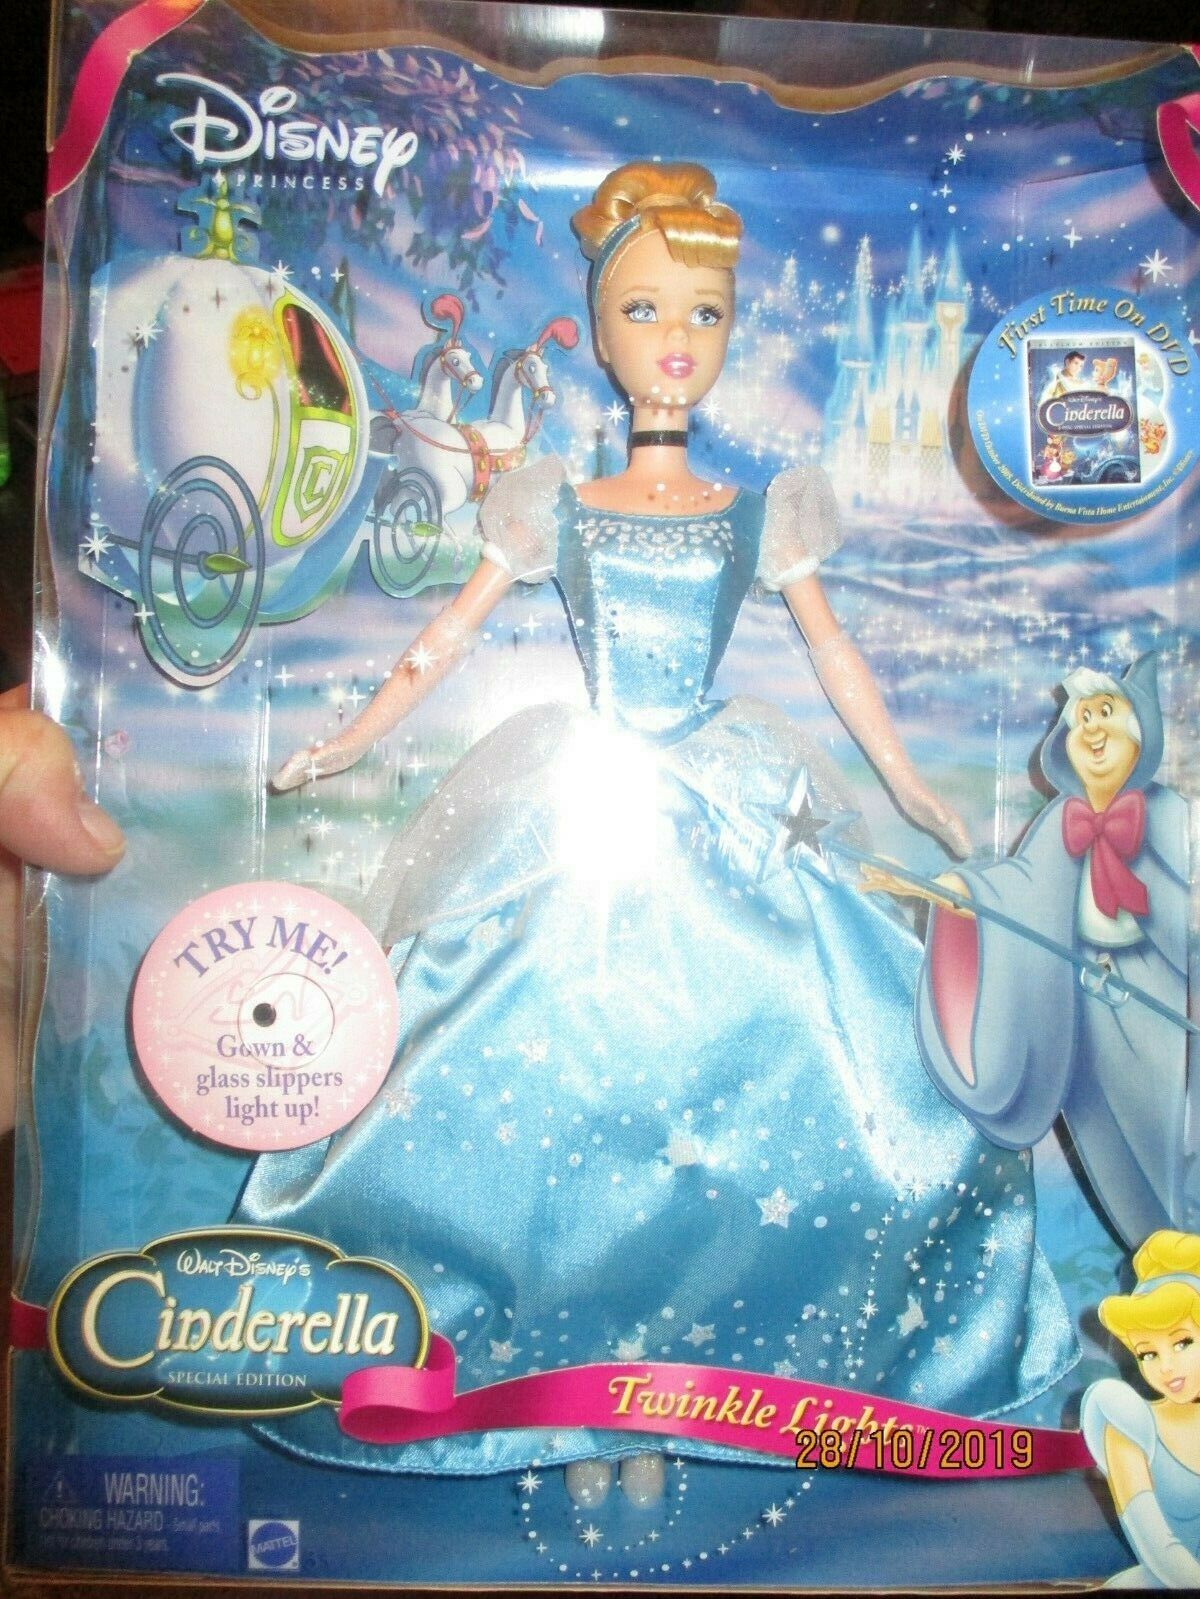 Disney Princess Cinderella Doll Special Edition Twinkle Lights New Never Opened